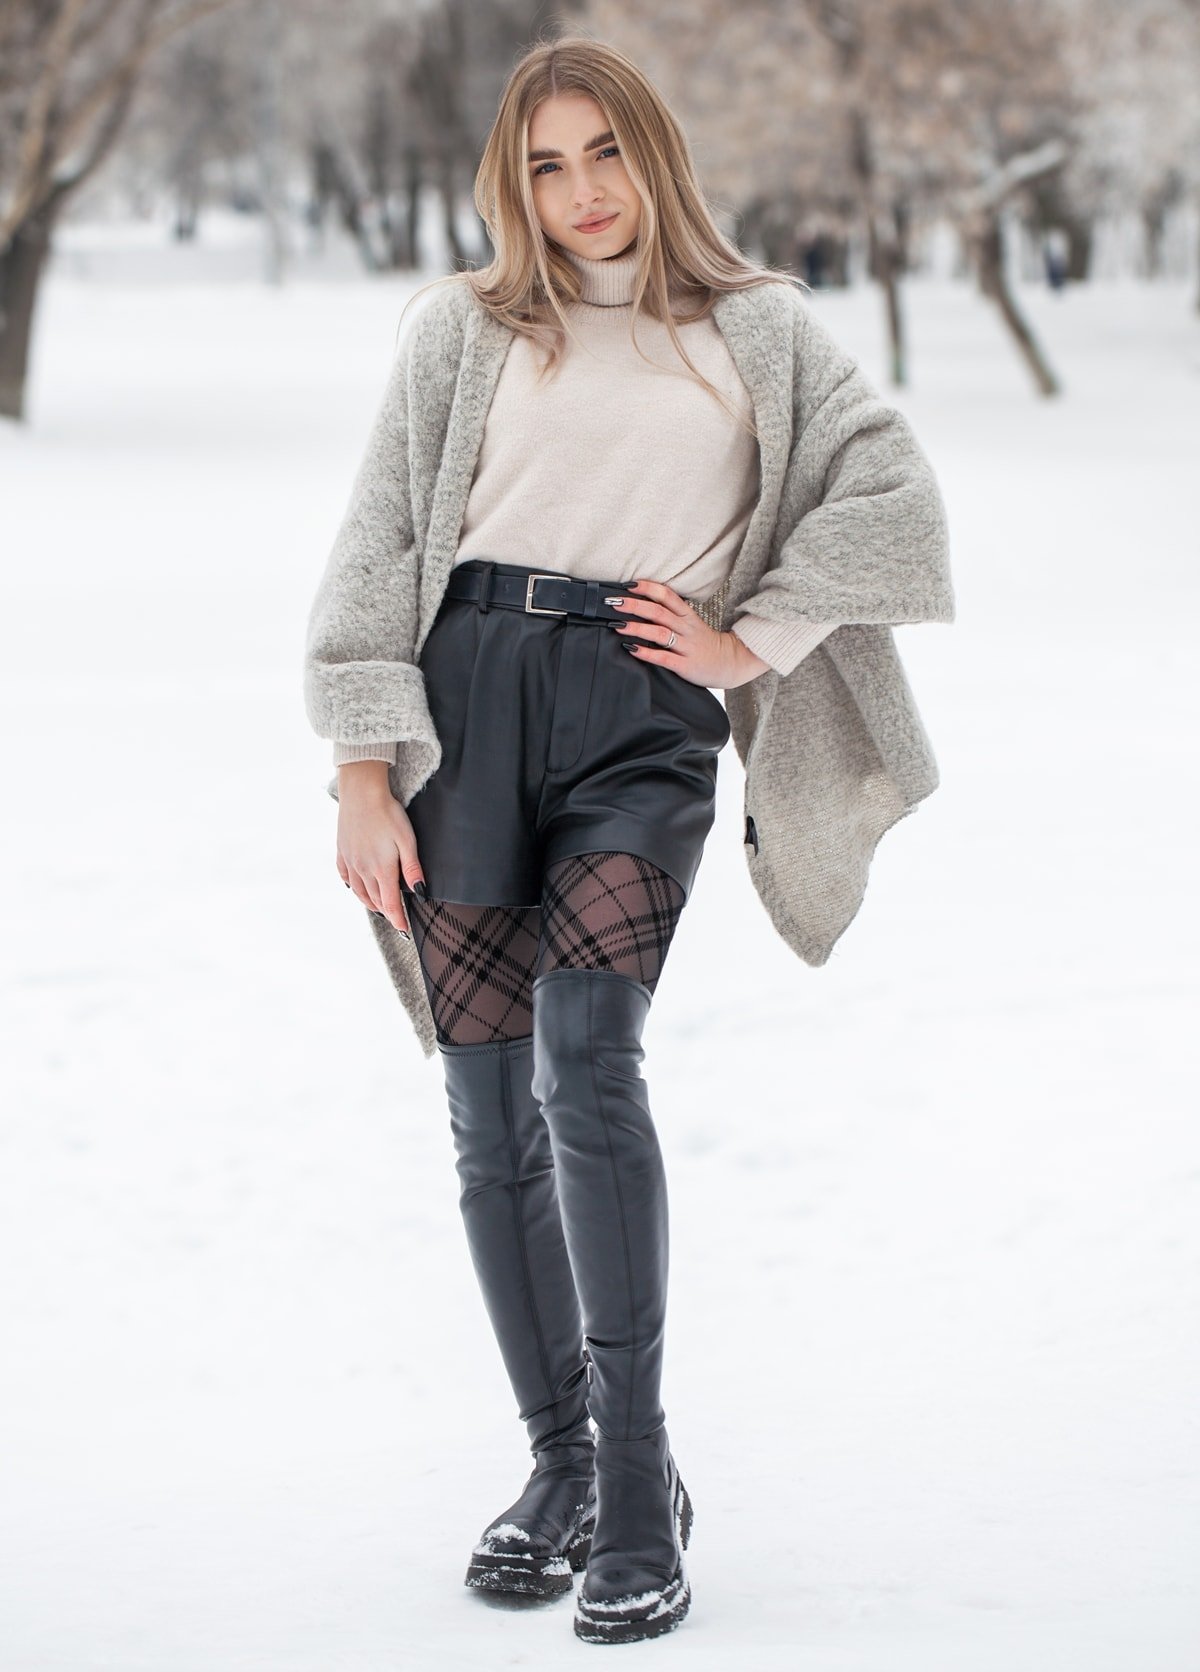 A beautiful young blonde woman shows how to wear black over-the-knee boots in winter